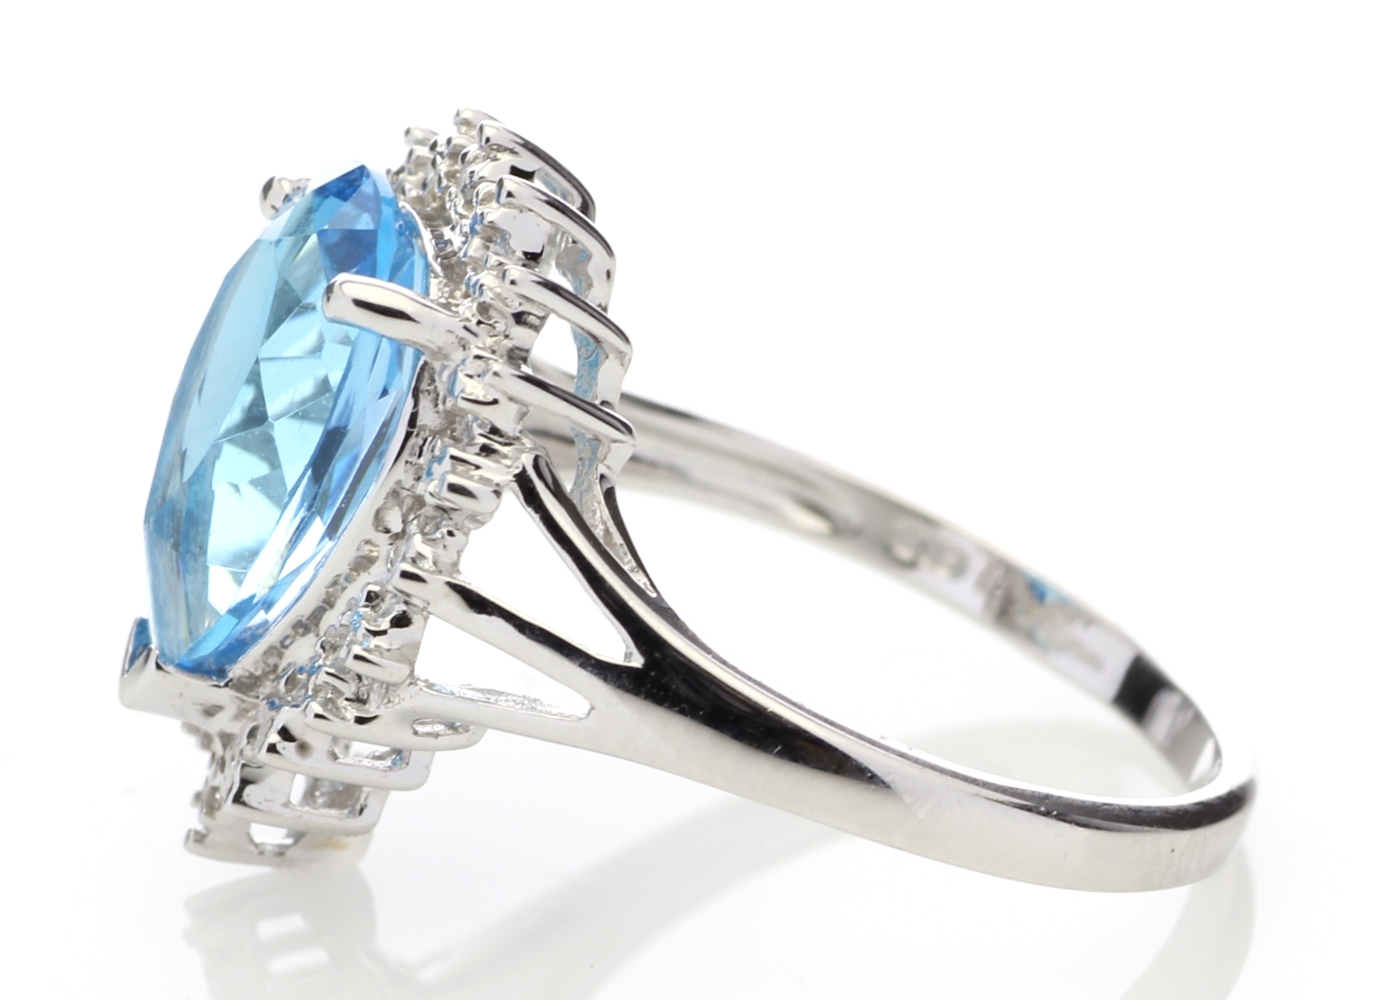 9ct White Gold Diamond And Blue Topaz Ring - Image 3 of 6